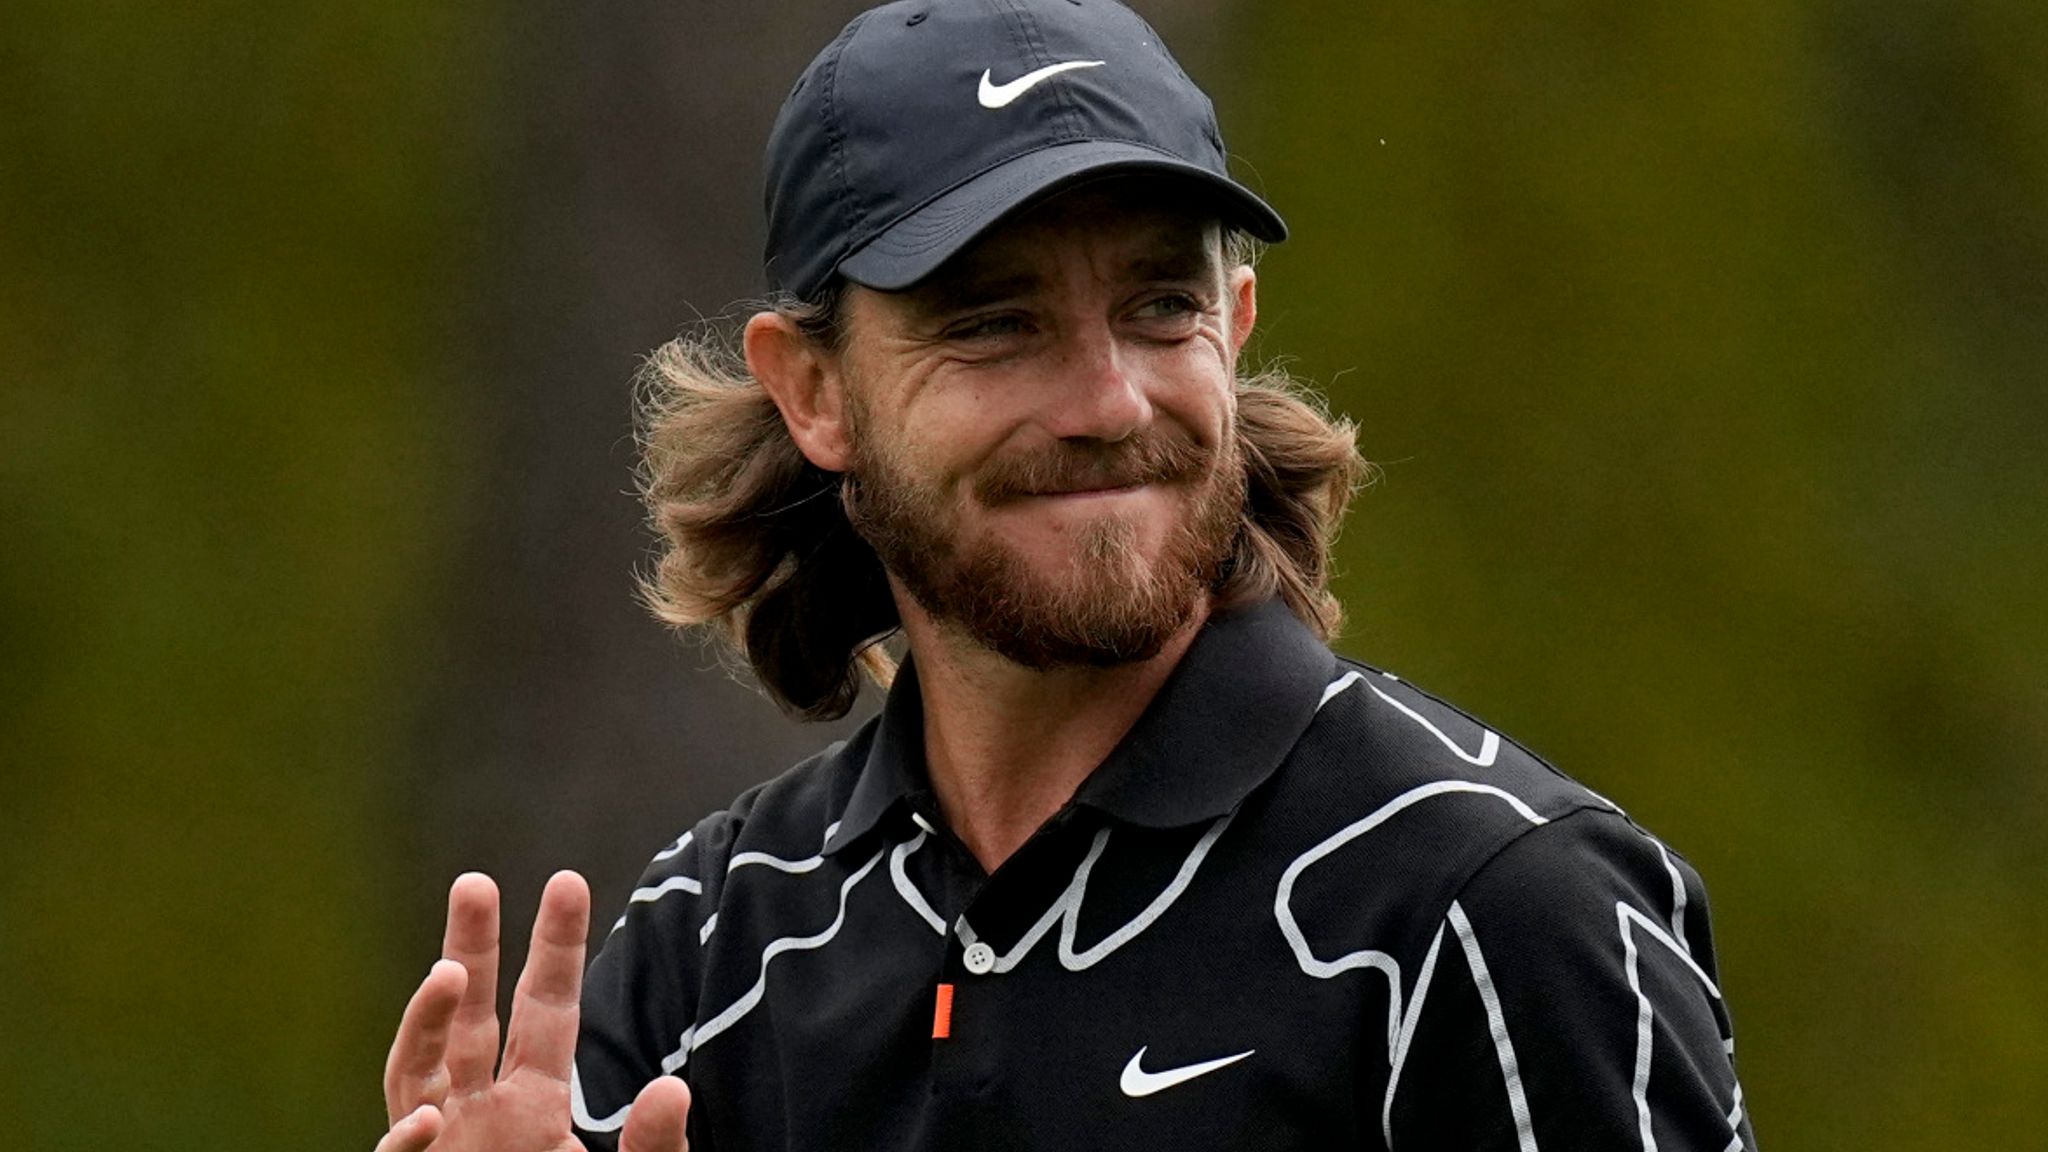 Tommy Fleetwood waving to the crowd after sinking a putt at the 2021 Masters.